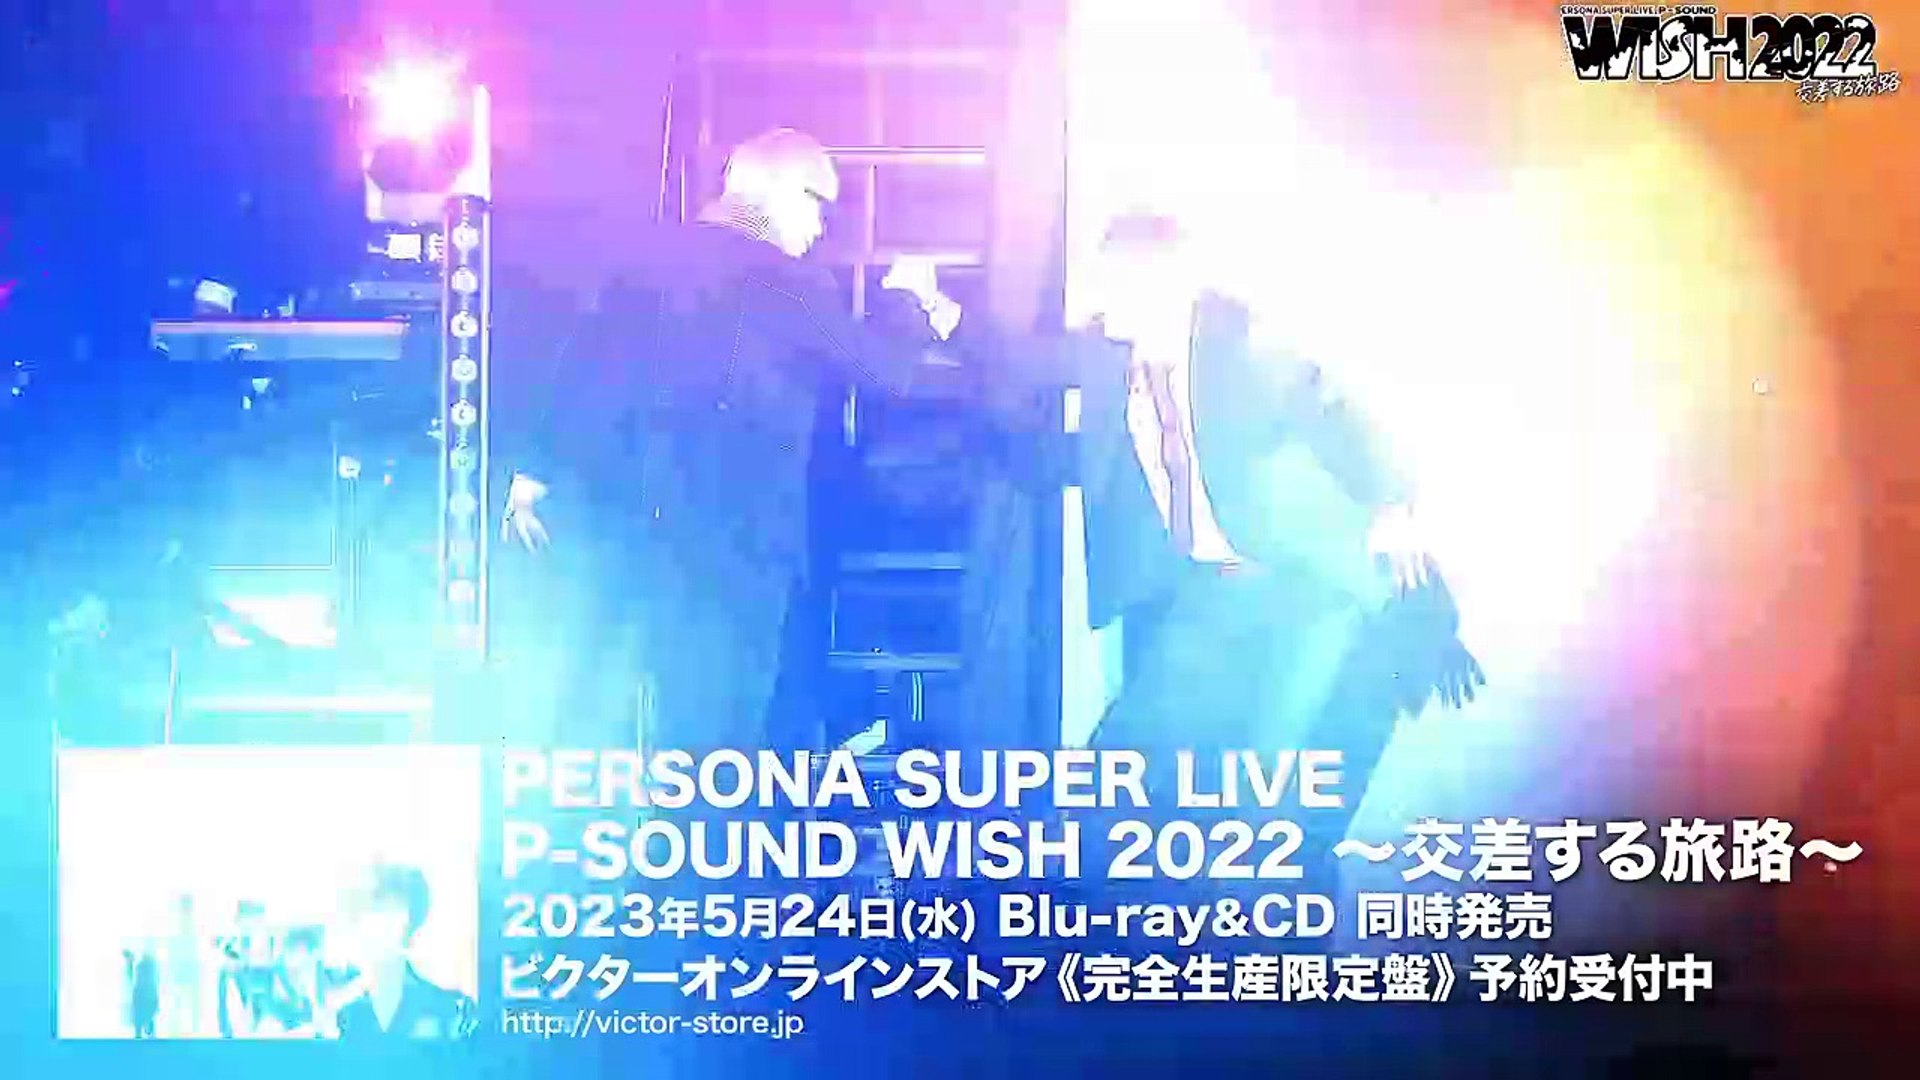 PERSONA SUPER LIVE P-SOUND WISH 2022 ~Intersecting Journey~ Day 2 | movie |  2023 | Official Trailer